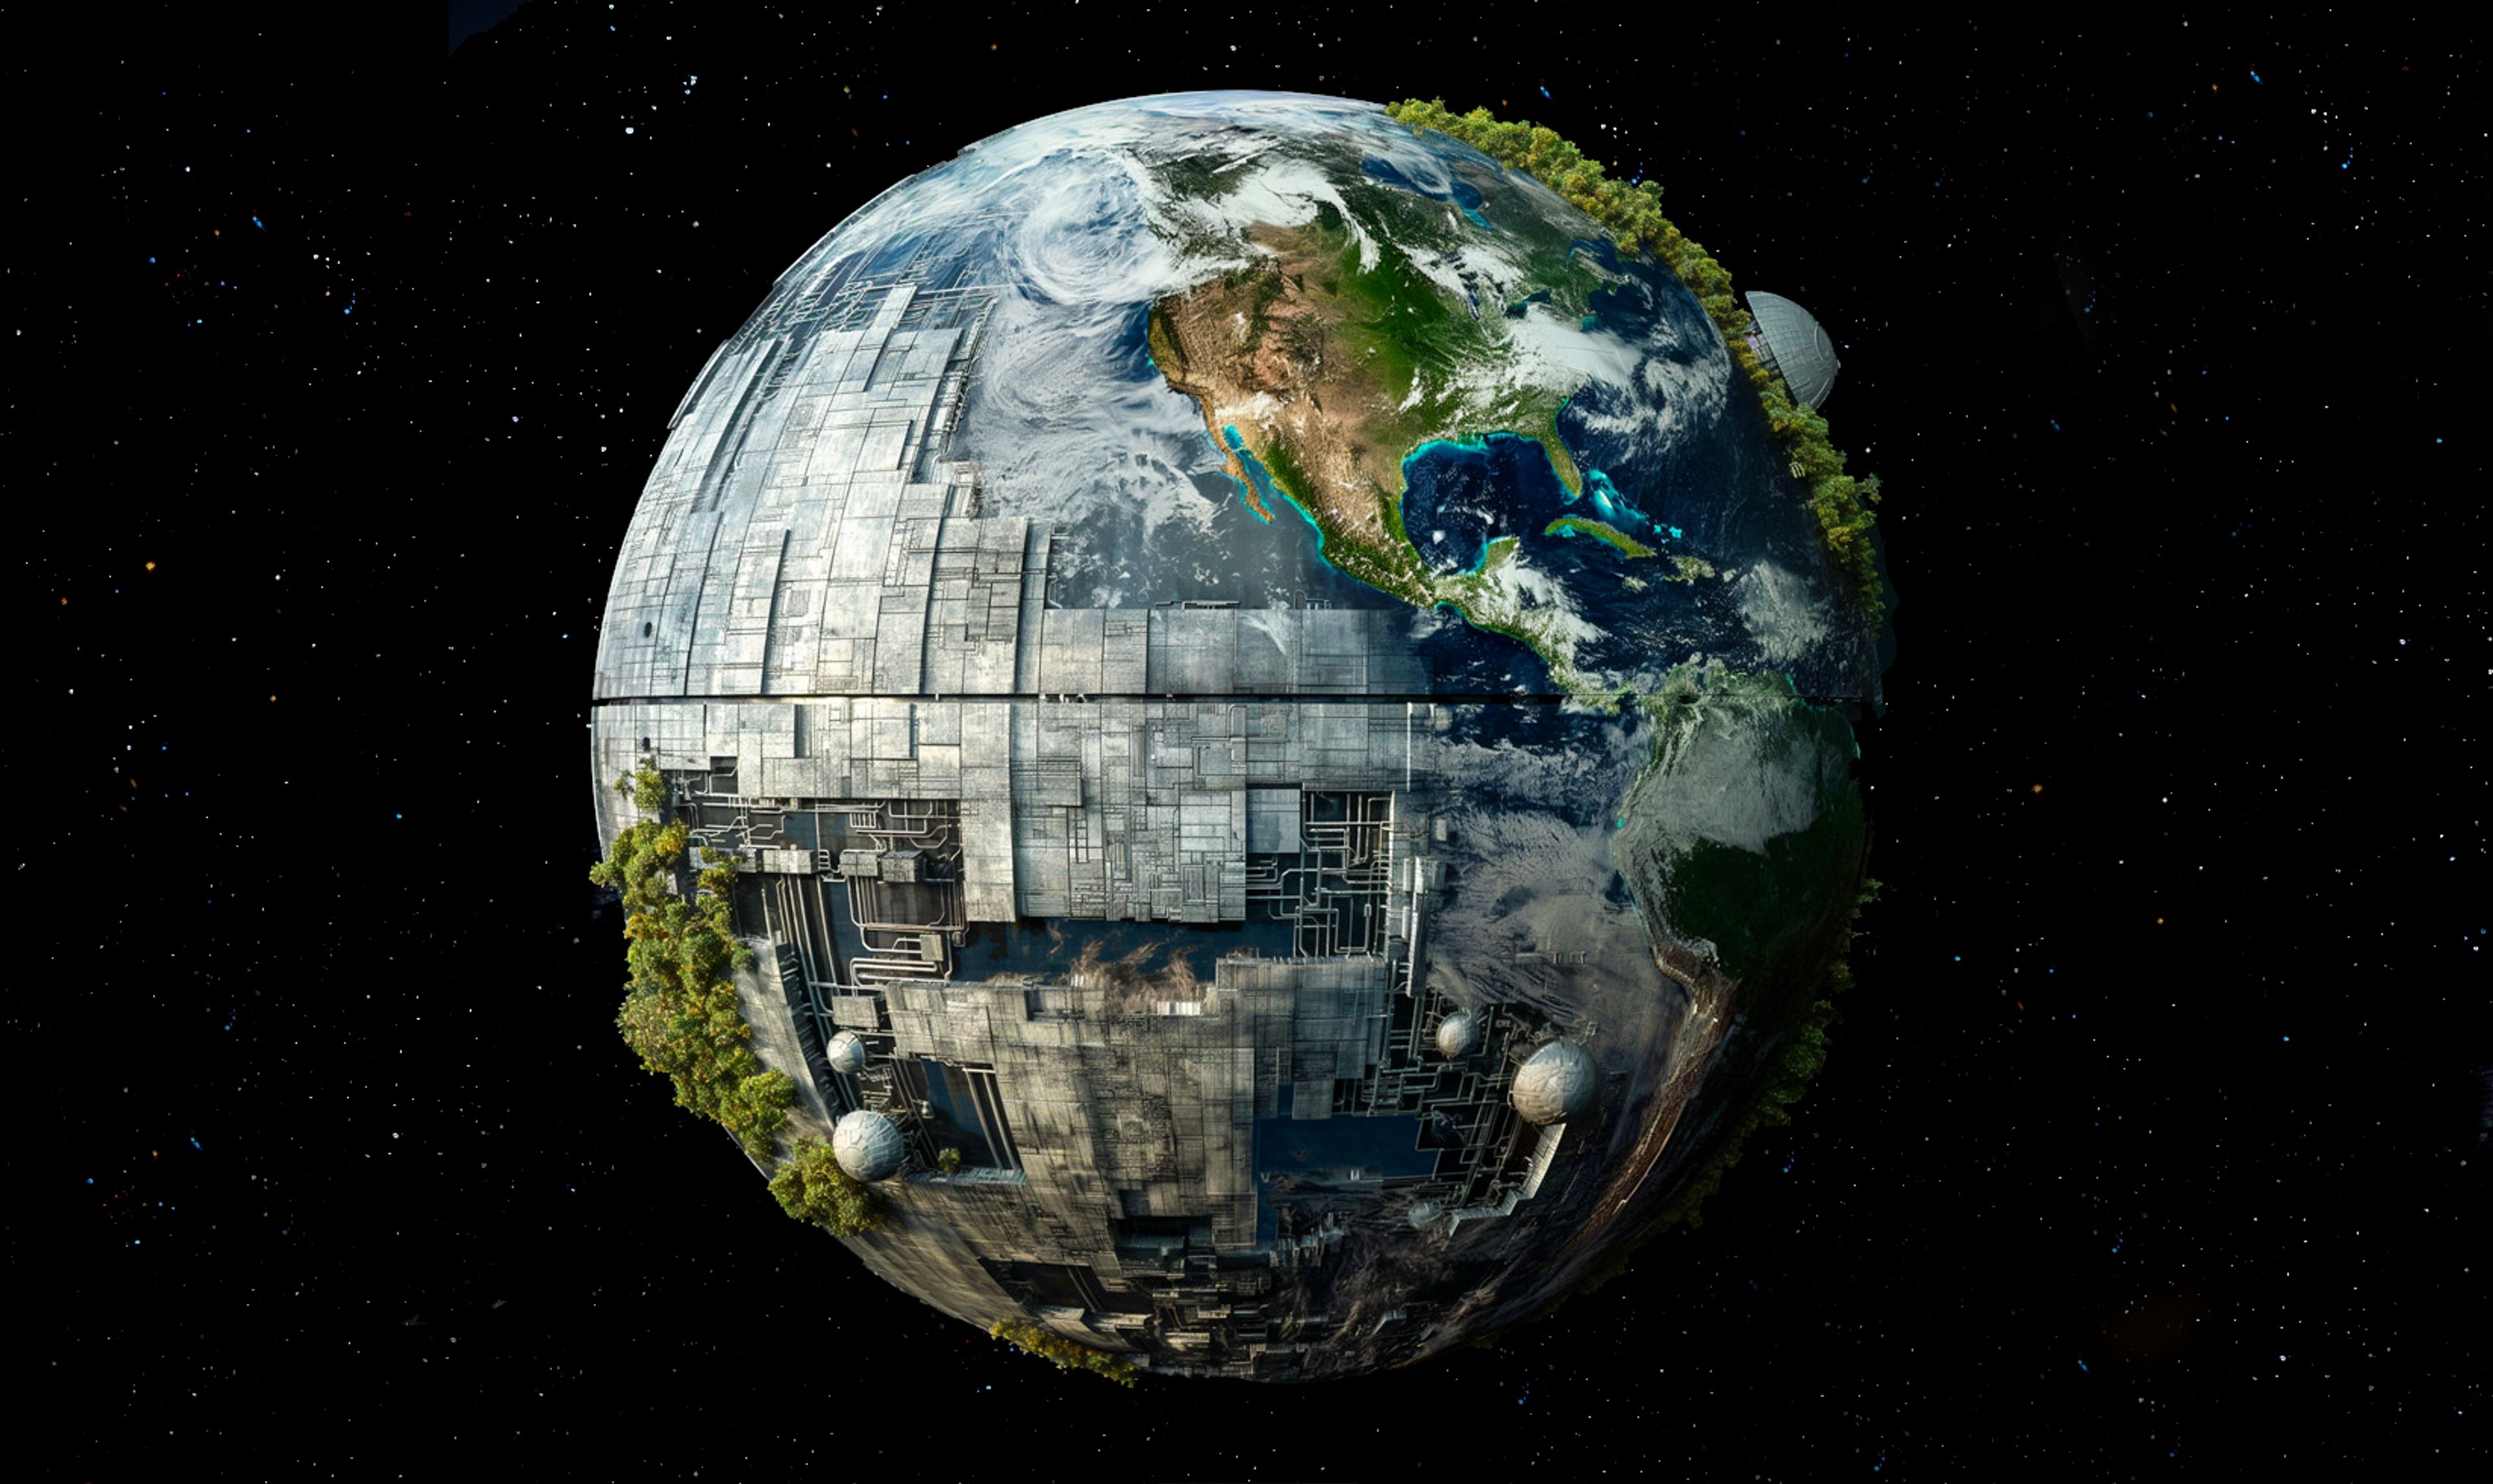 A photo-realistic fictional image of the earth, floating in space, being transformed into a metal-covered planet - similar to the Star Wars Death Star. 